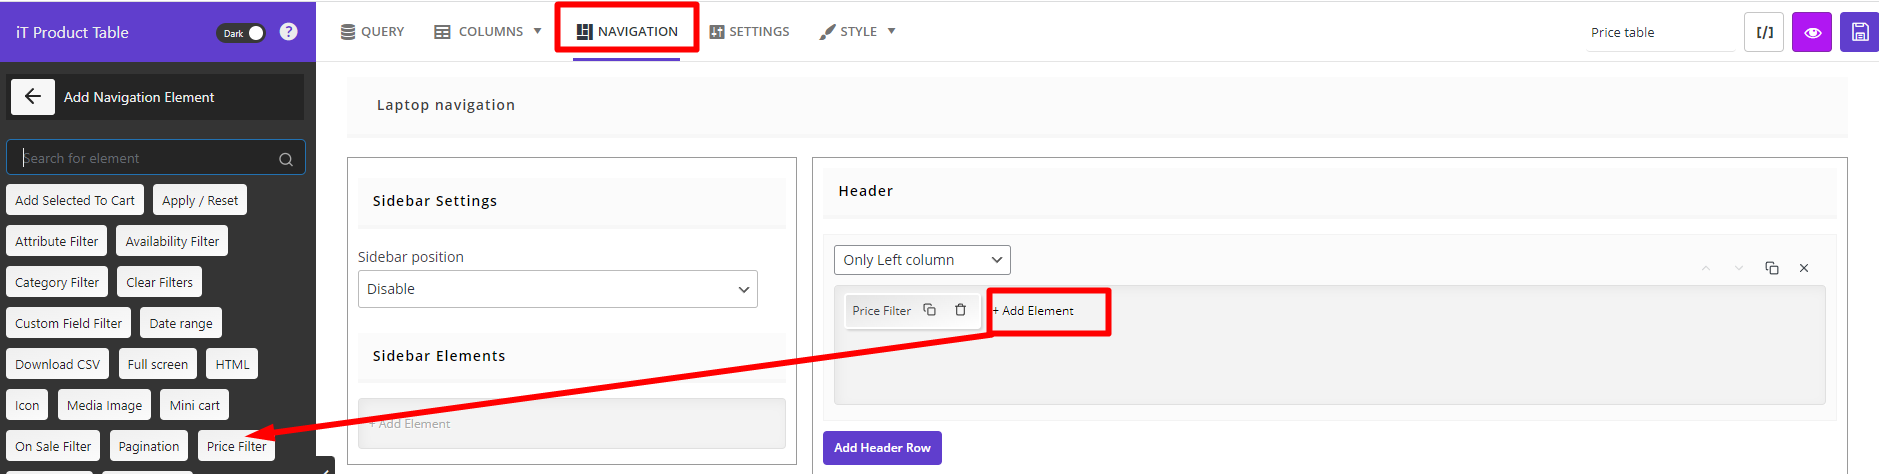 select navigation tab and choose price filter element in header